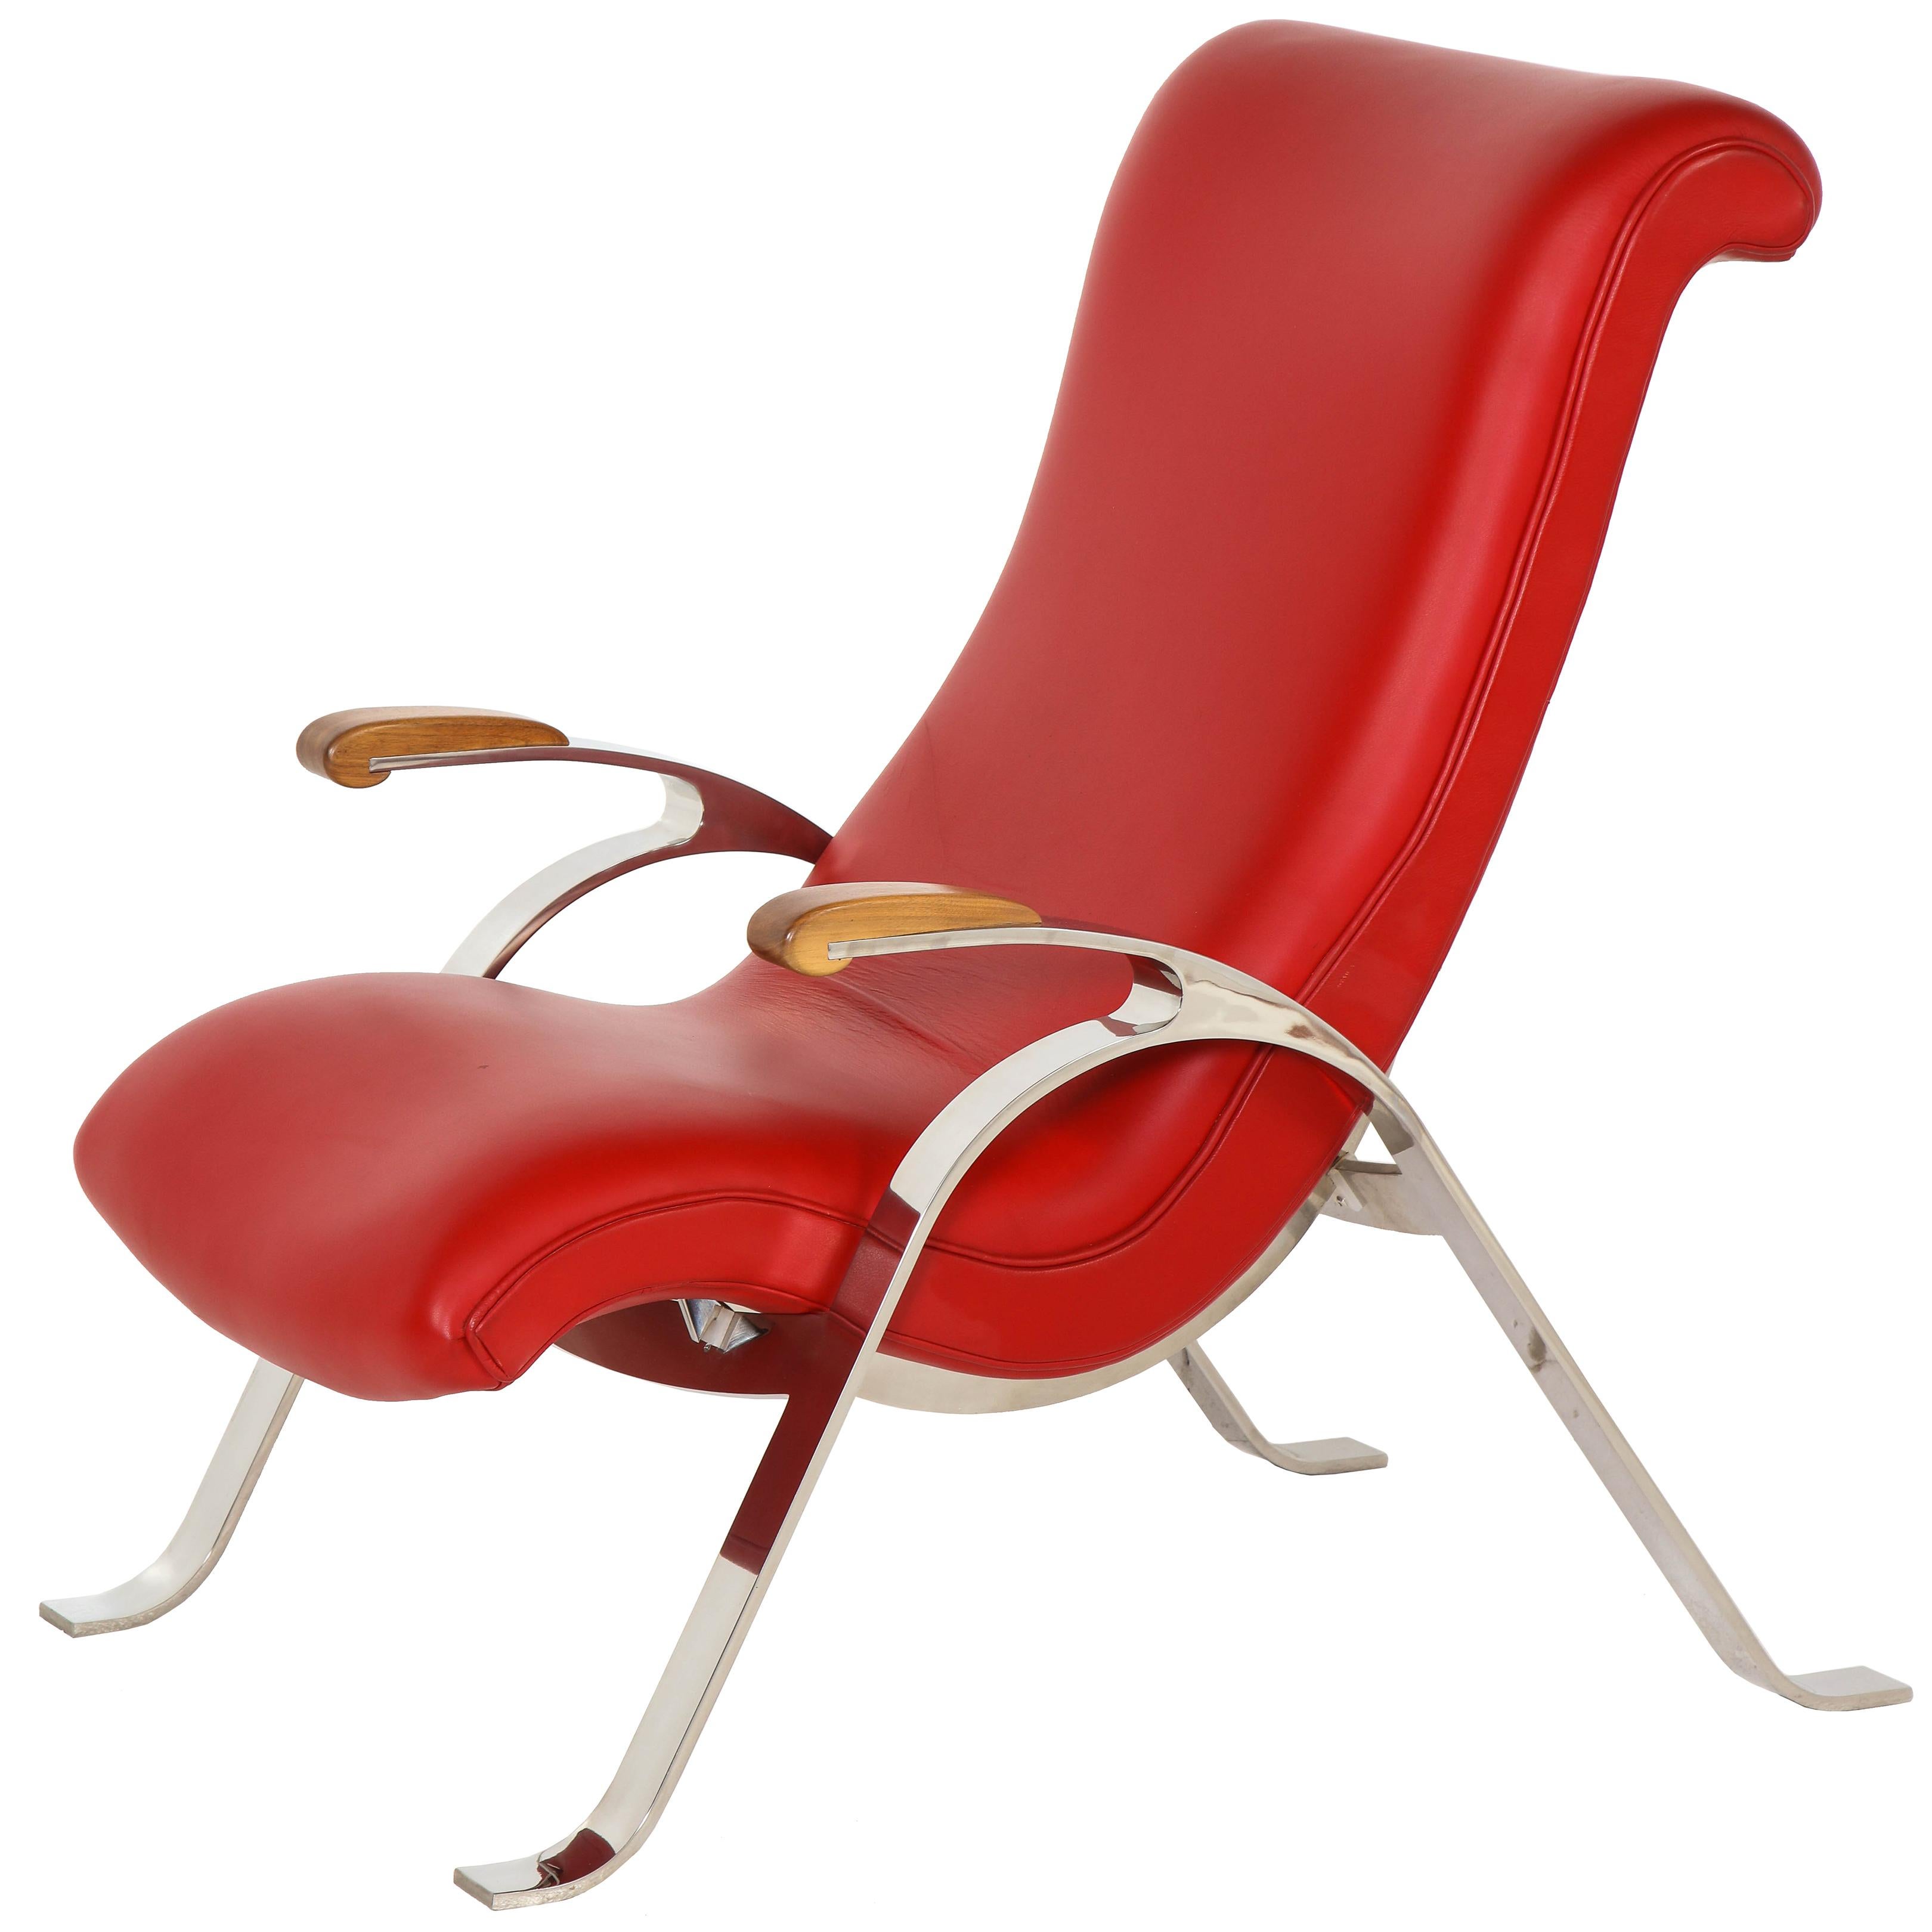 Multi-Position Reclining Chair in Red Offered by Vladimir Kagan Design Group For Sale